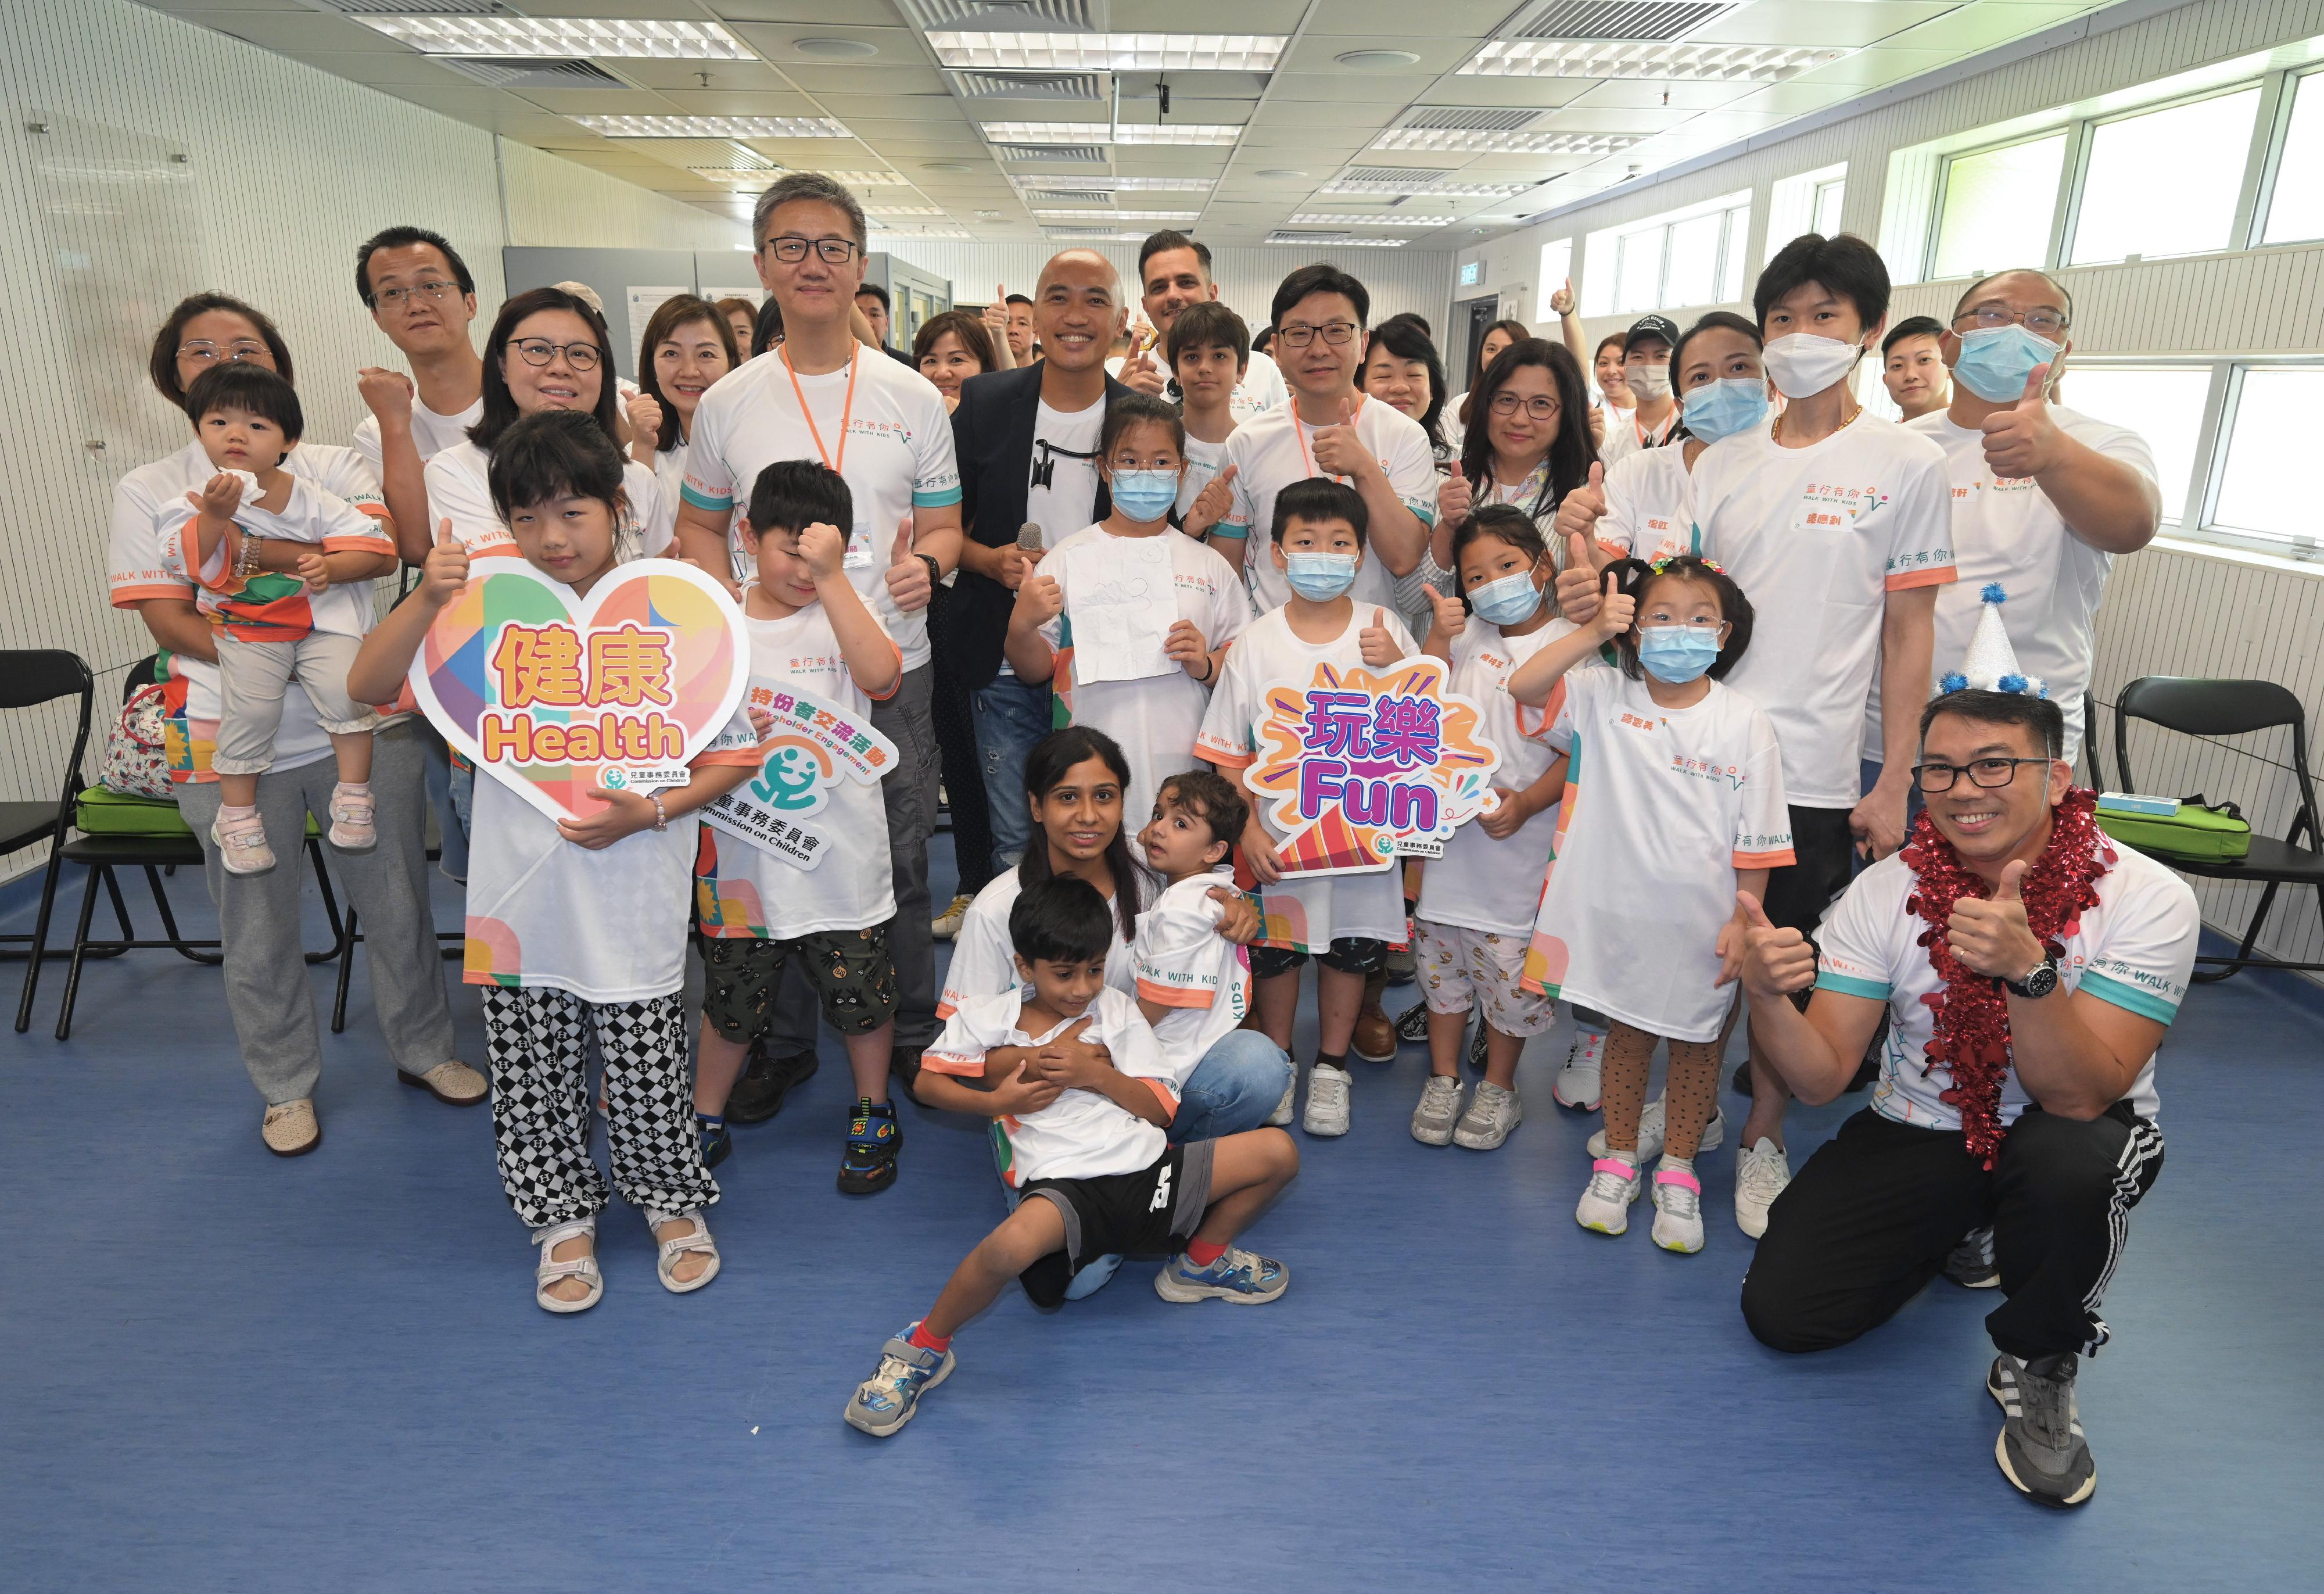 The Commission on Children, the Hong Kong Police Force and the Social Welfare Department today (June 22) jointly held the Walk with Kids@Healthy Happy FUNday at the Junior Police Call Permanent Activity Centre and Integrated Youth Training Camp at Pat Heung. Parents and children joined a variety of interactive games and activities, thereby enhancing their awareness on the importance of physical and mental health. Photo shows the Commissioner of Police, Mr Siu Chak-yee (second row, third left), the Secretary for Labour and Welfare, Mr Chris Sun (second row, fifth right) and participants.